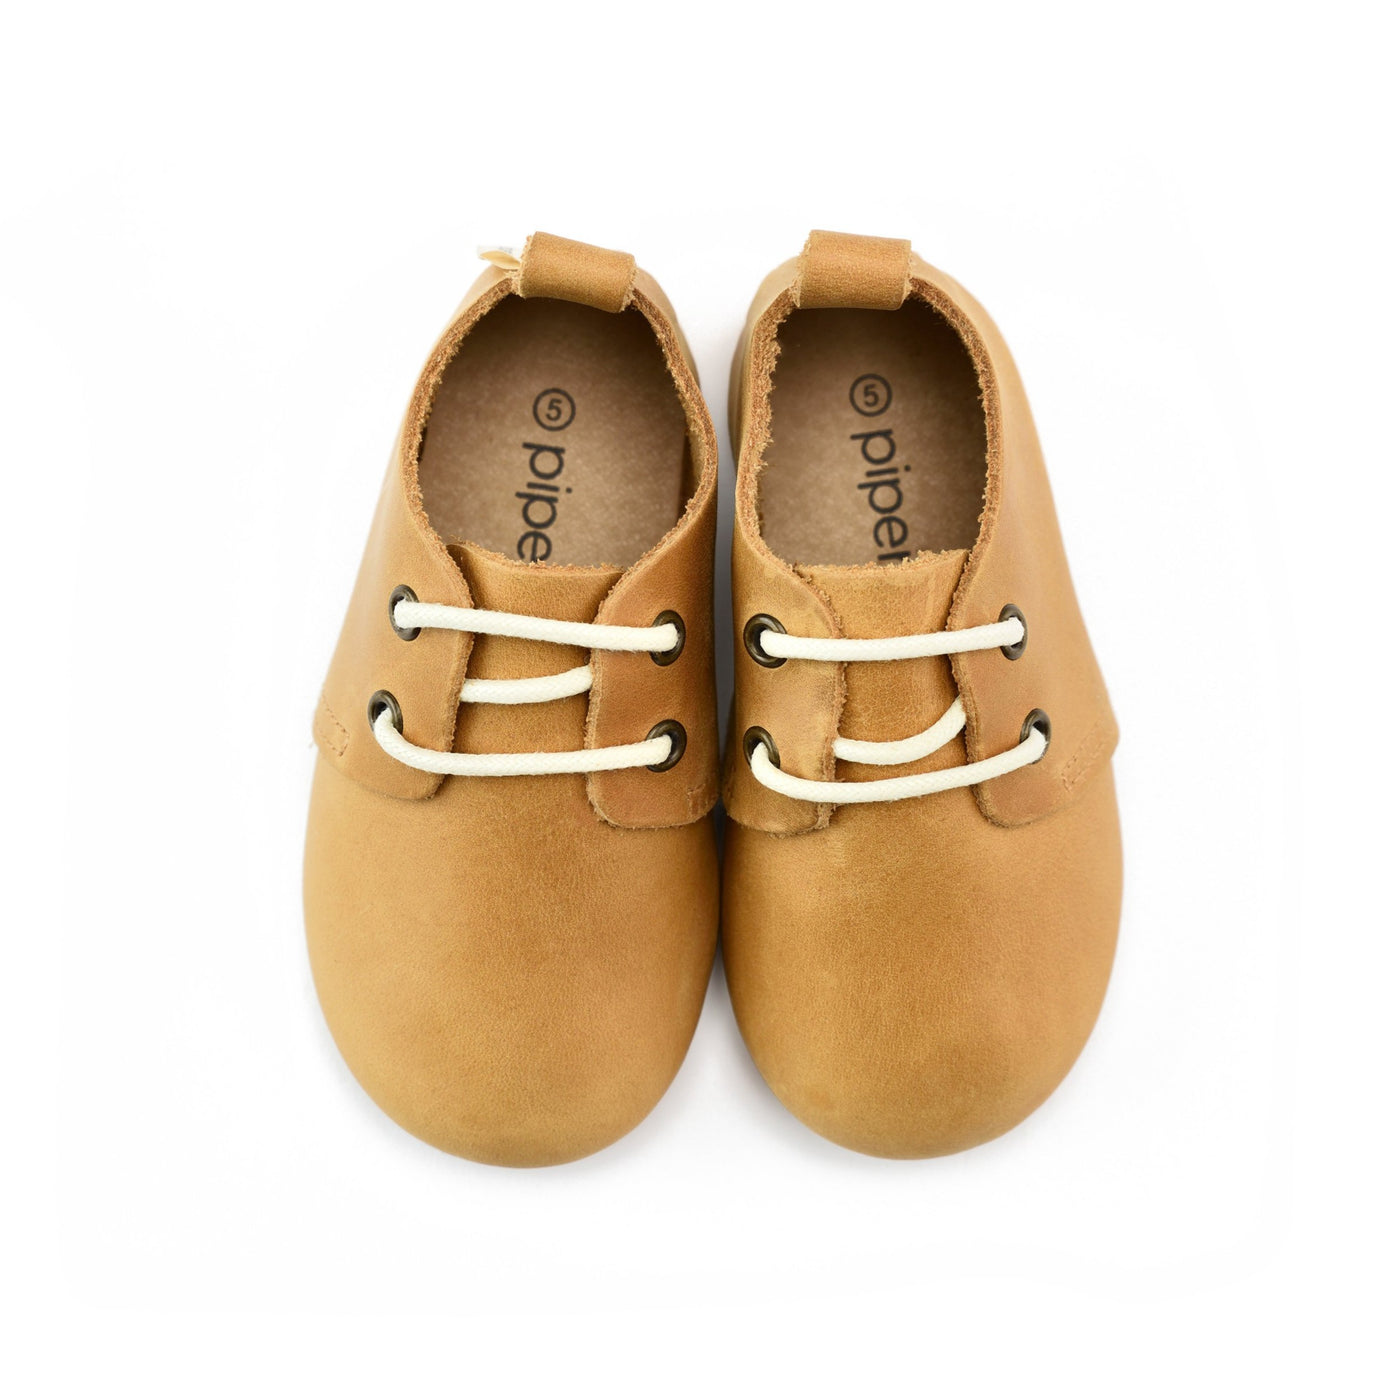 Natural - Low Top Oxfords - Hard Sole